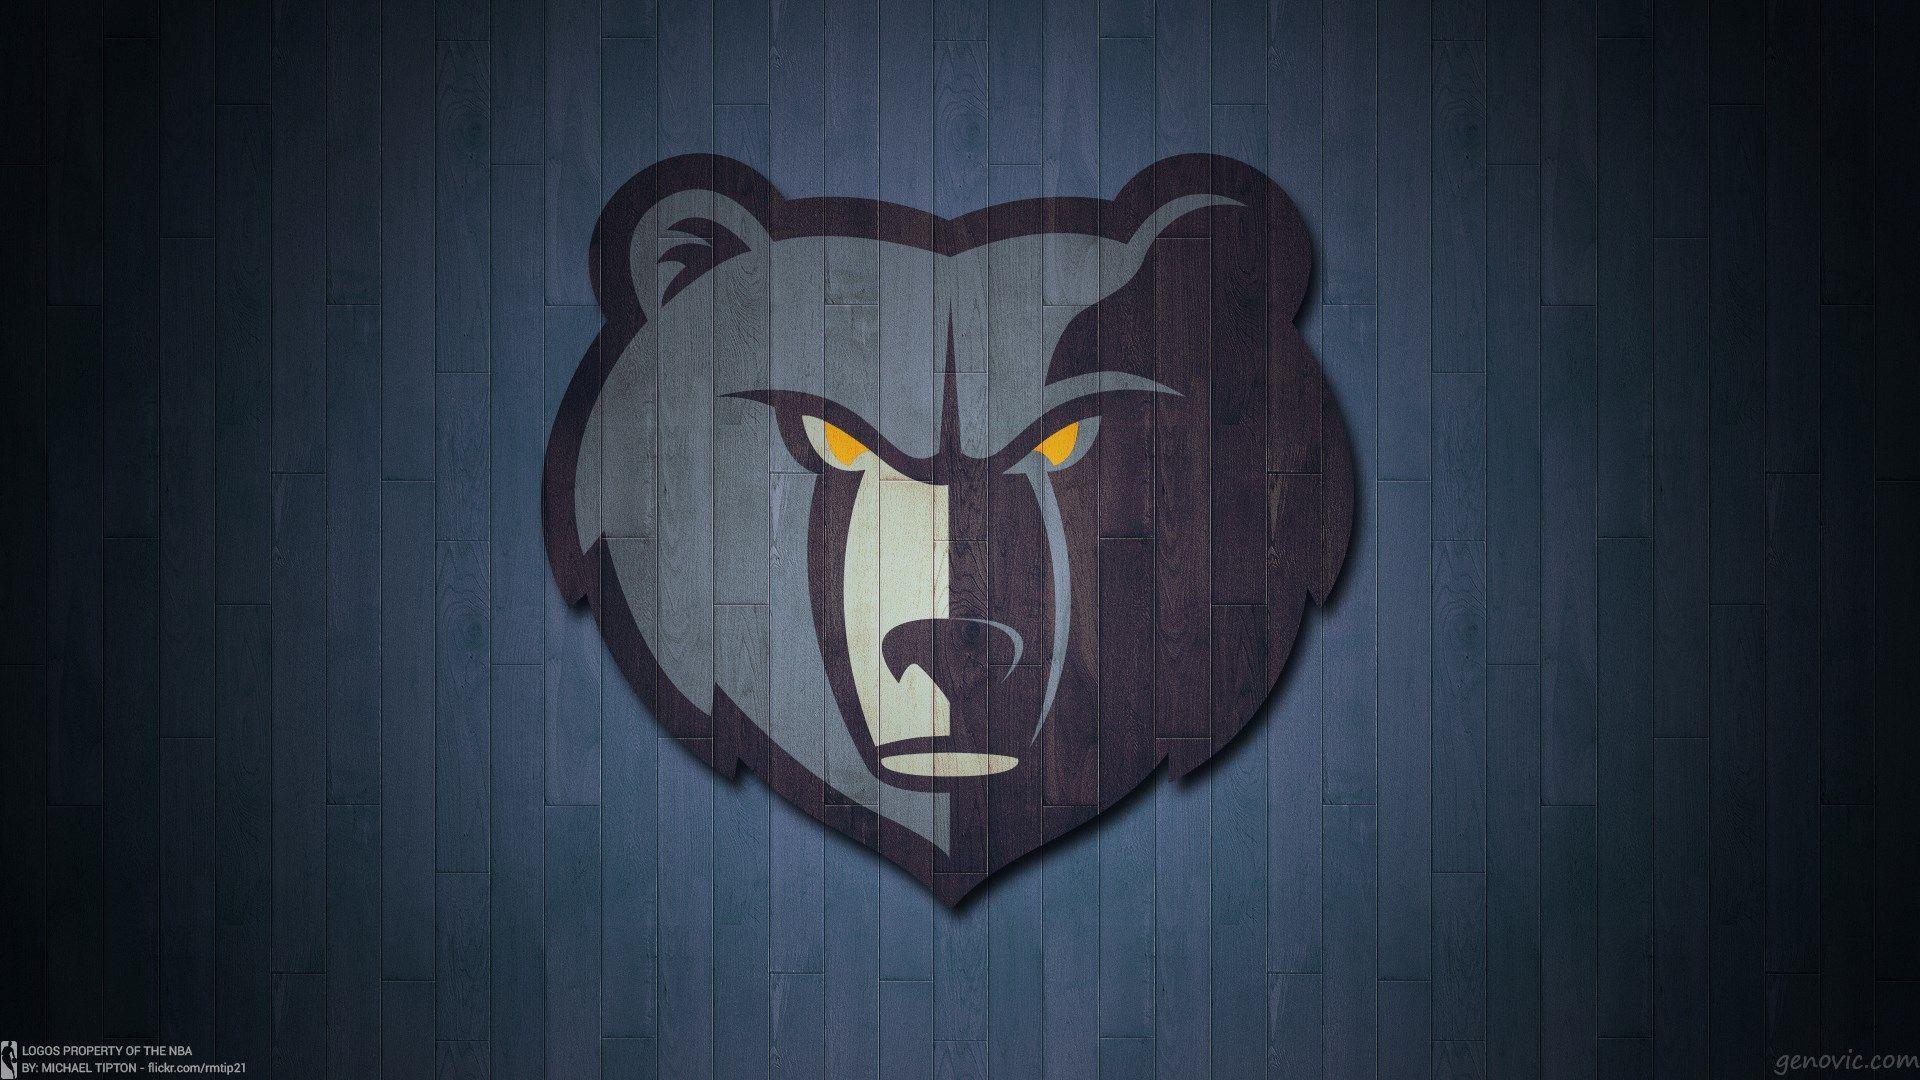 View Nba Memphis Grizzlies Logo - Free Download to Your ...